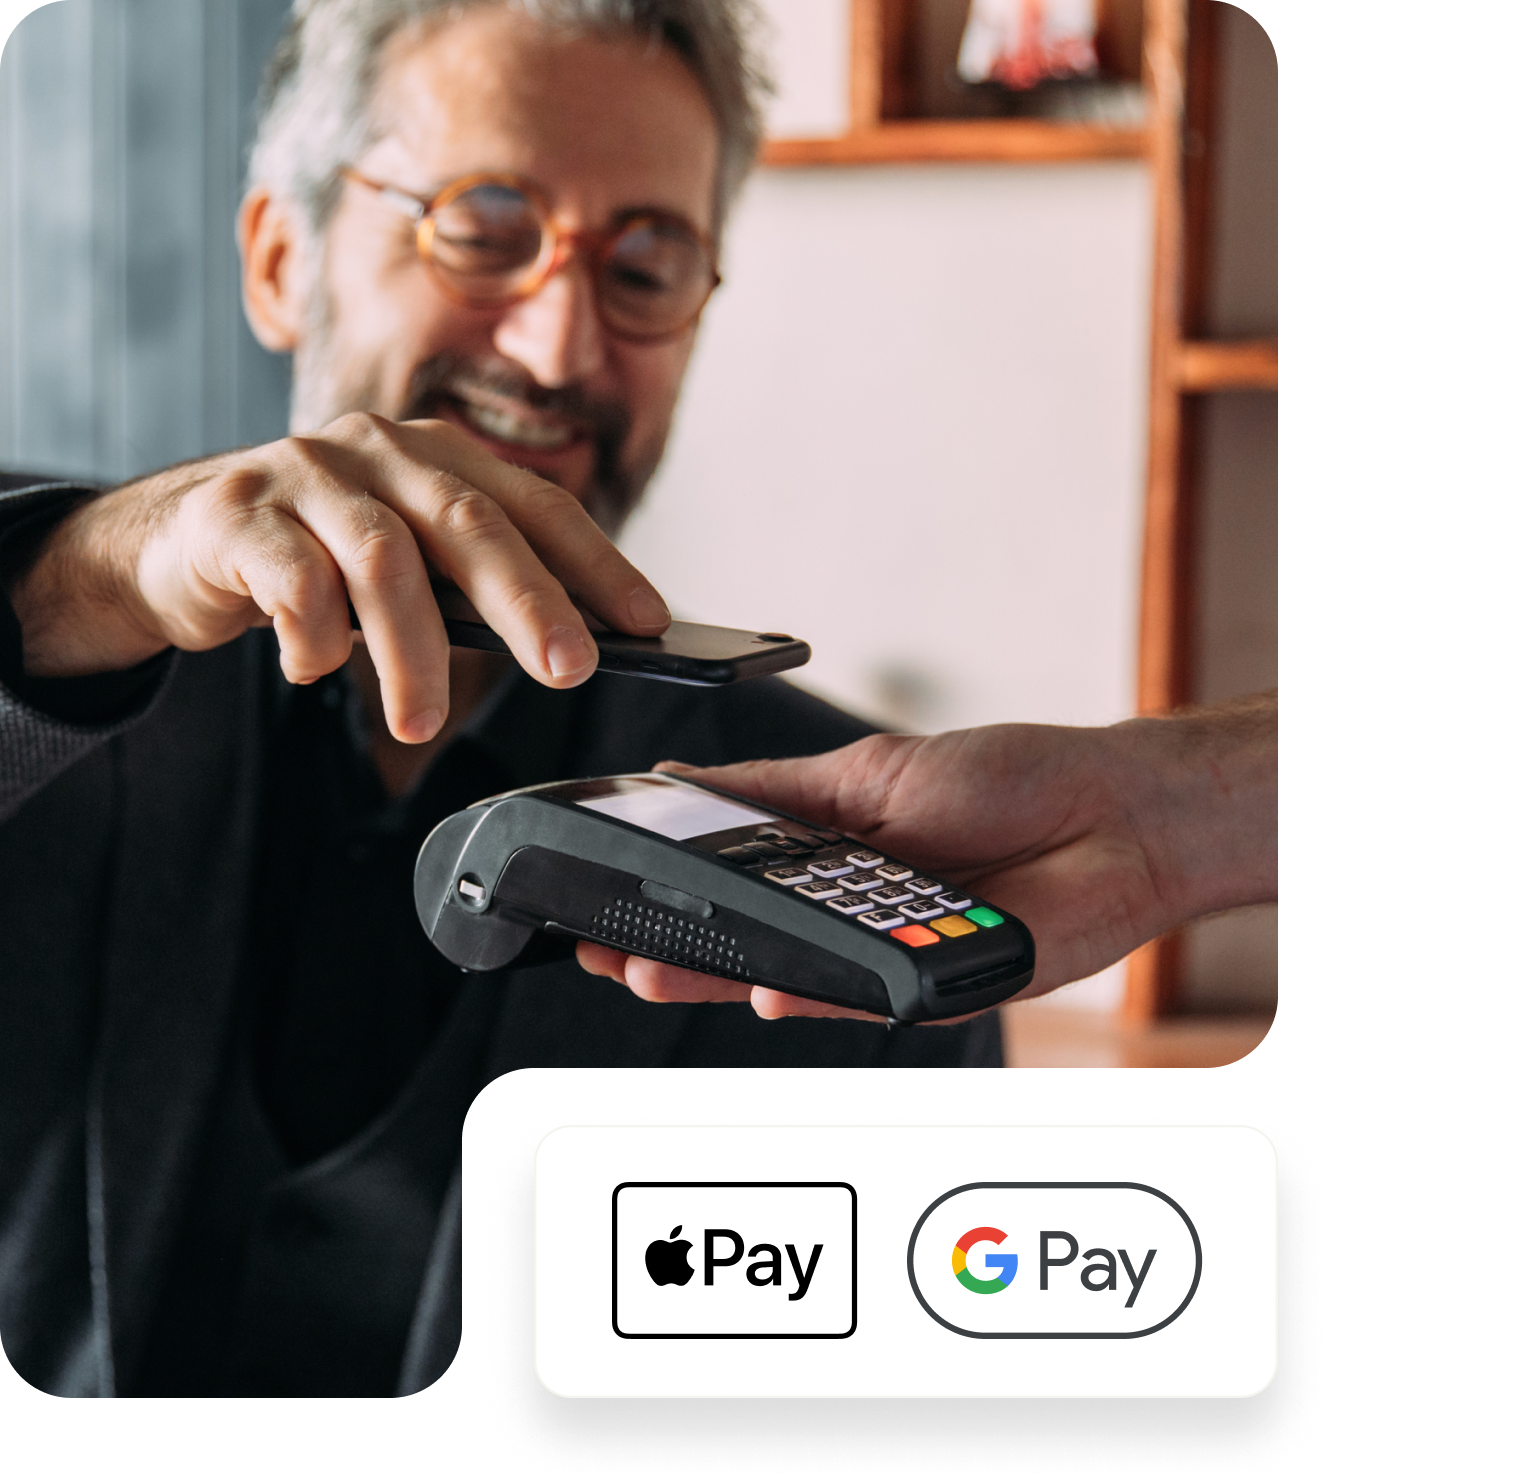 Use Pliant cards with Apple Pay and Google Pay on mobile devices